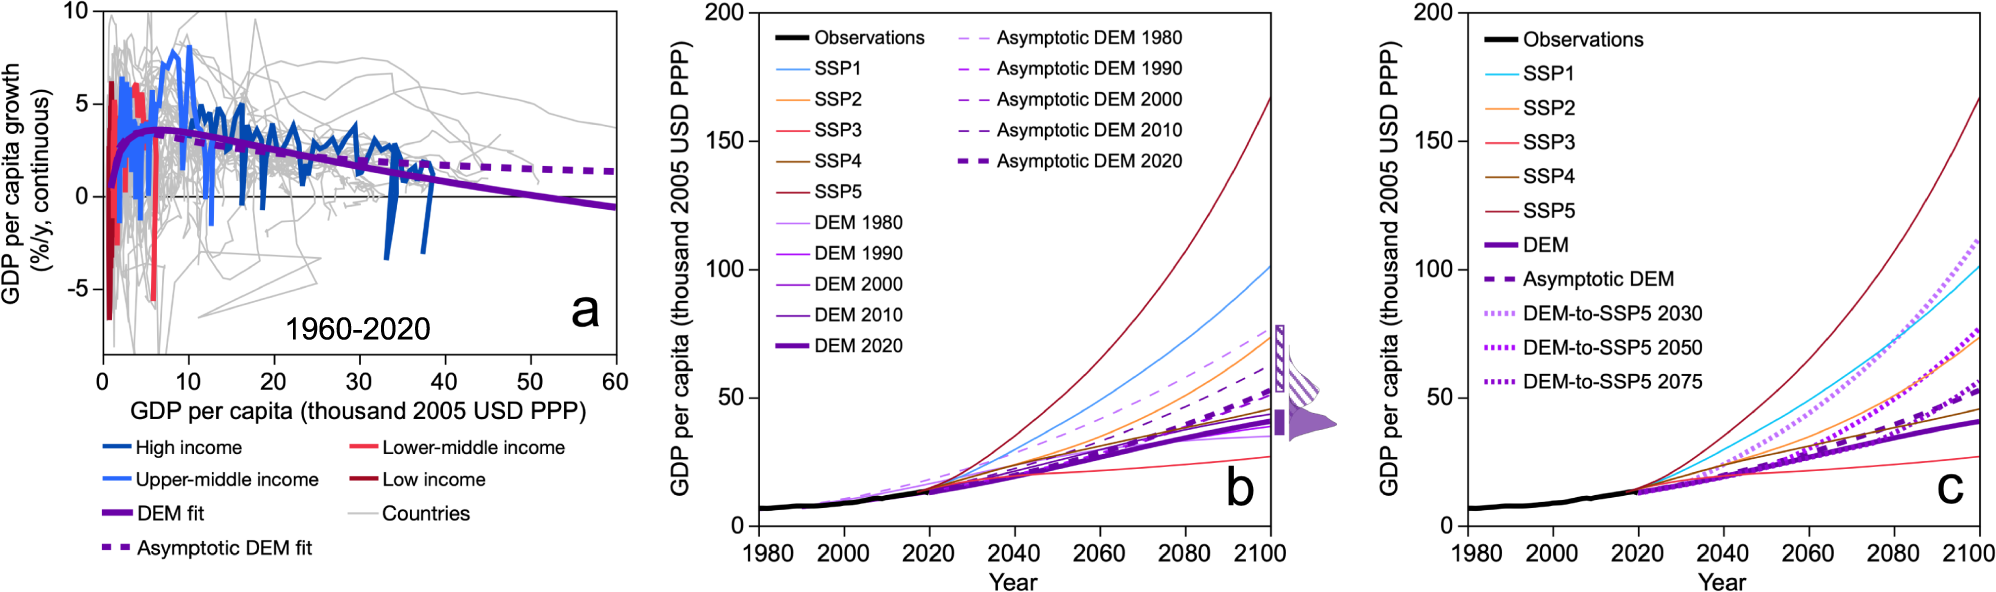 Multidecadal dynamics project slow 21st-century economic growth and income  convergence | Communications Earth & Environment